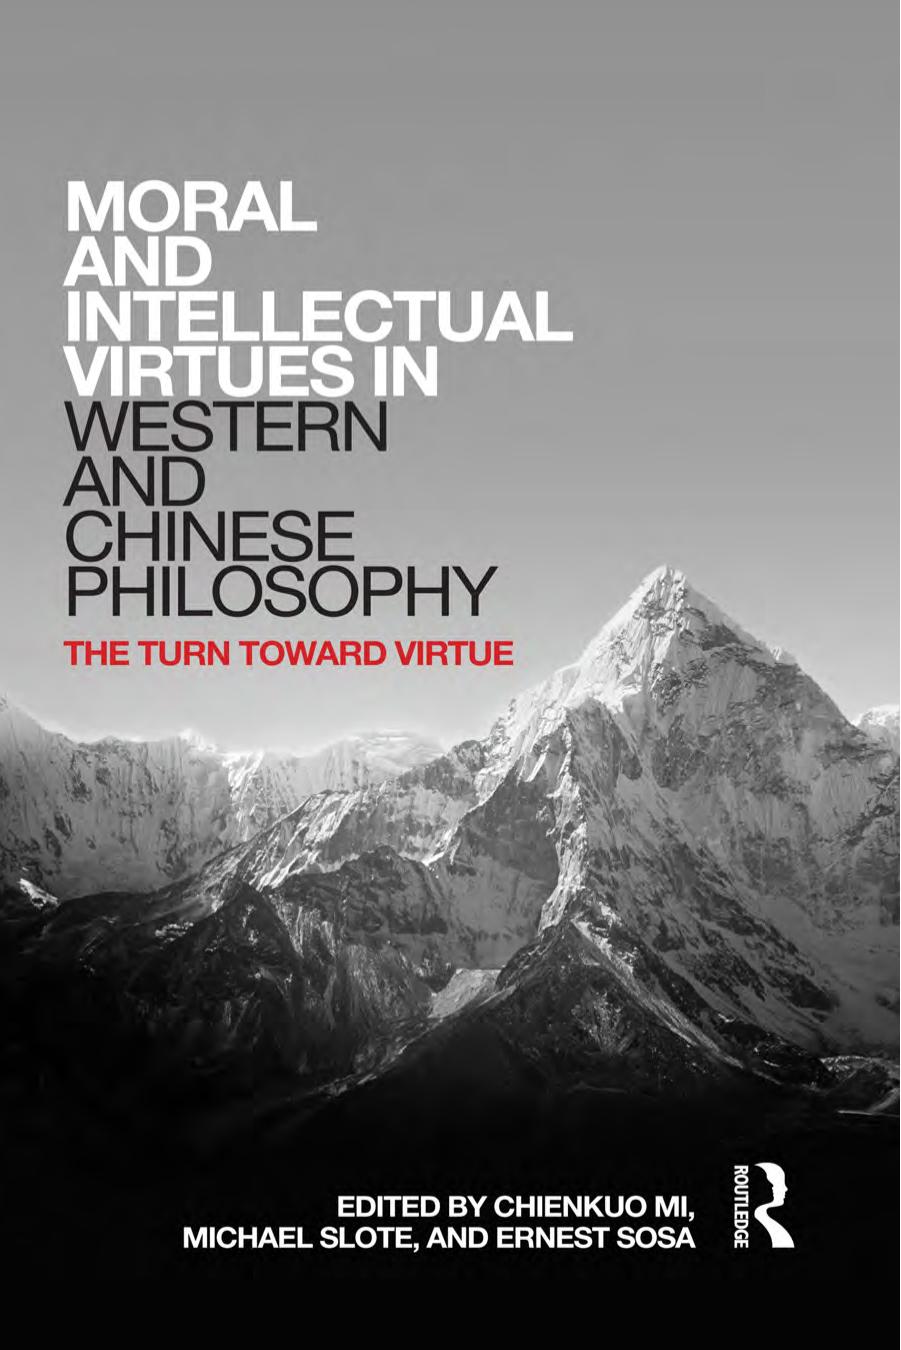 Moral and Intellectual Virtues in Western and Chinese Philosophy: The Turn Toward Virtue